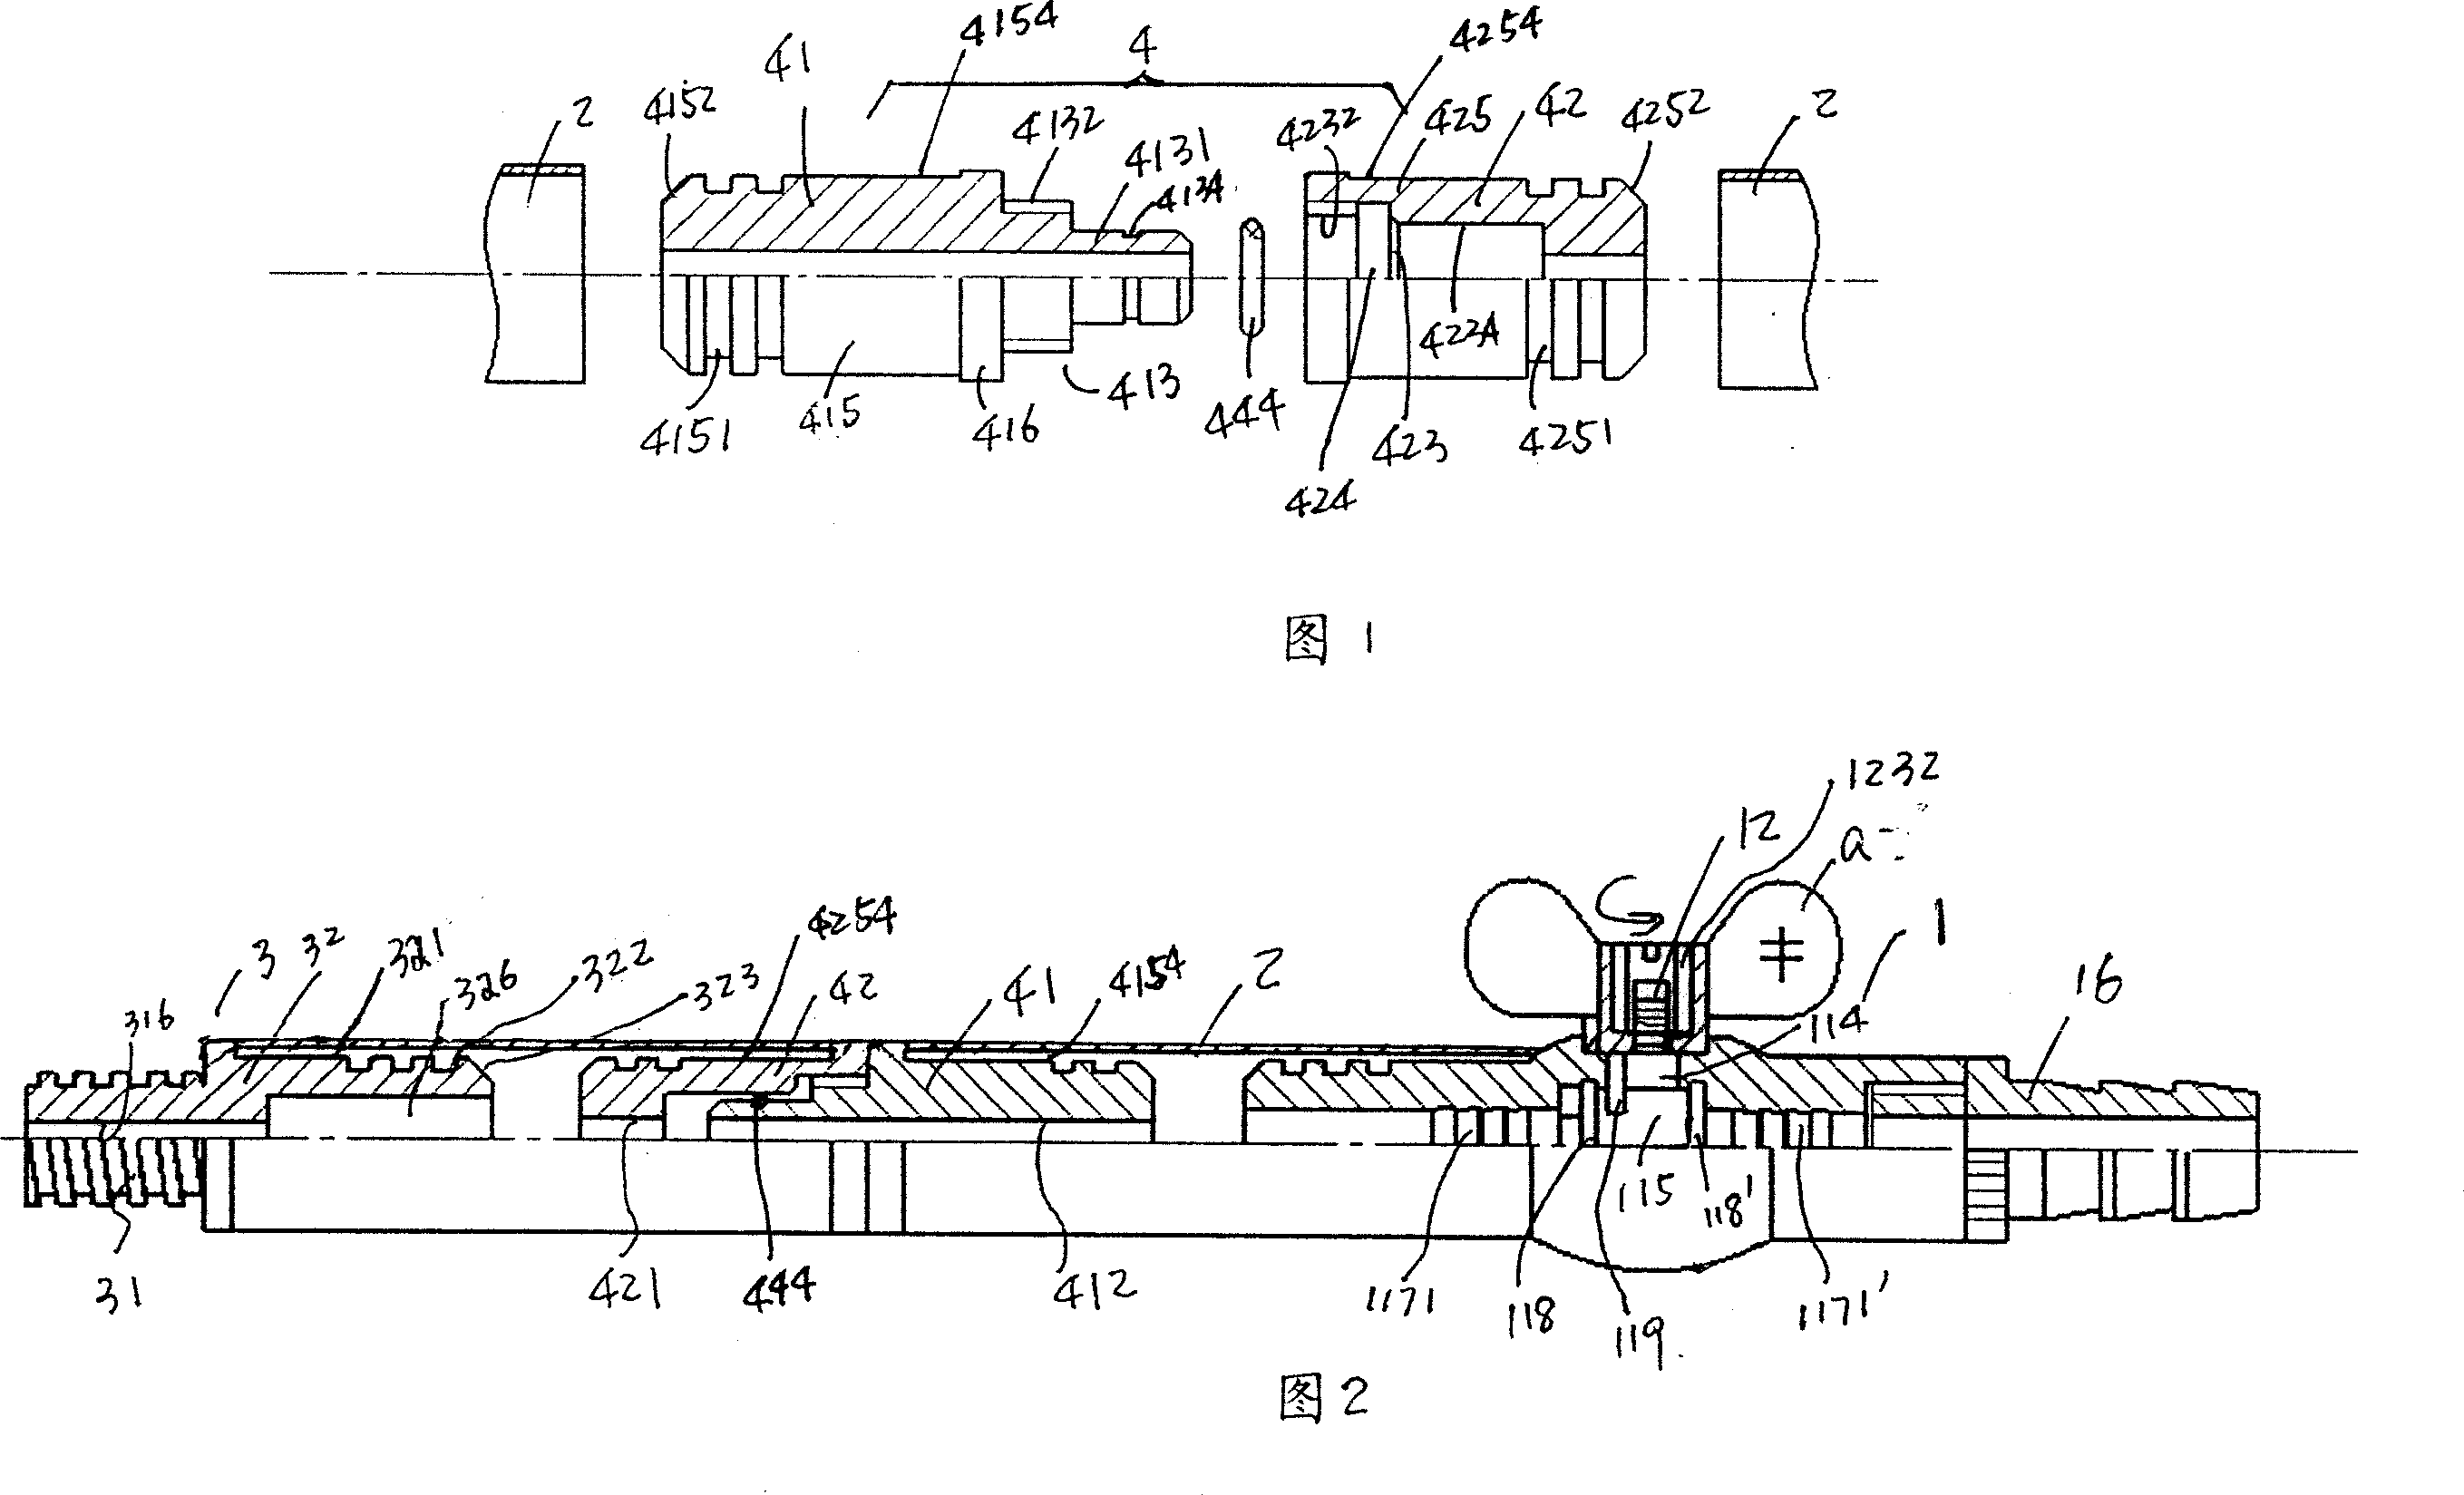 Connecting module for tool rod and its tool handle